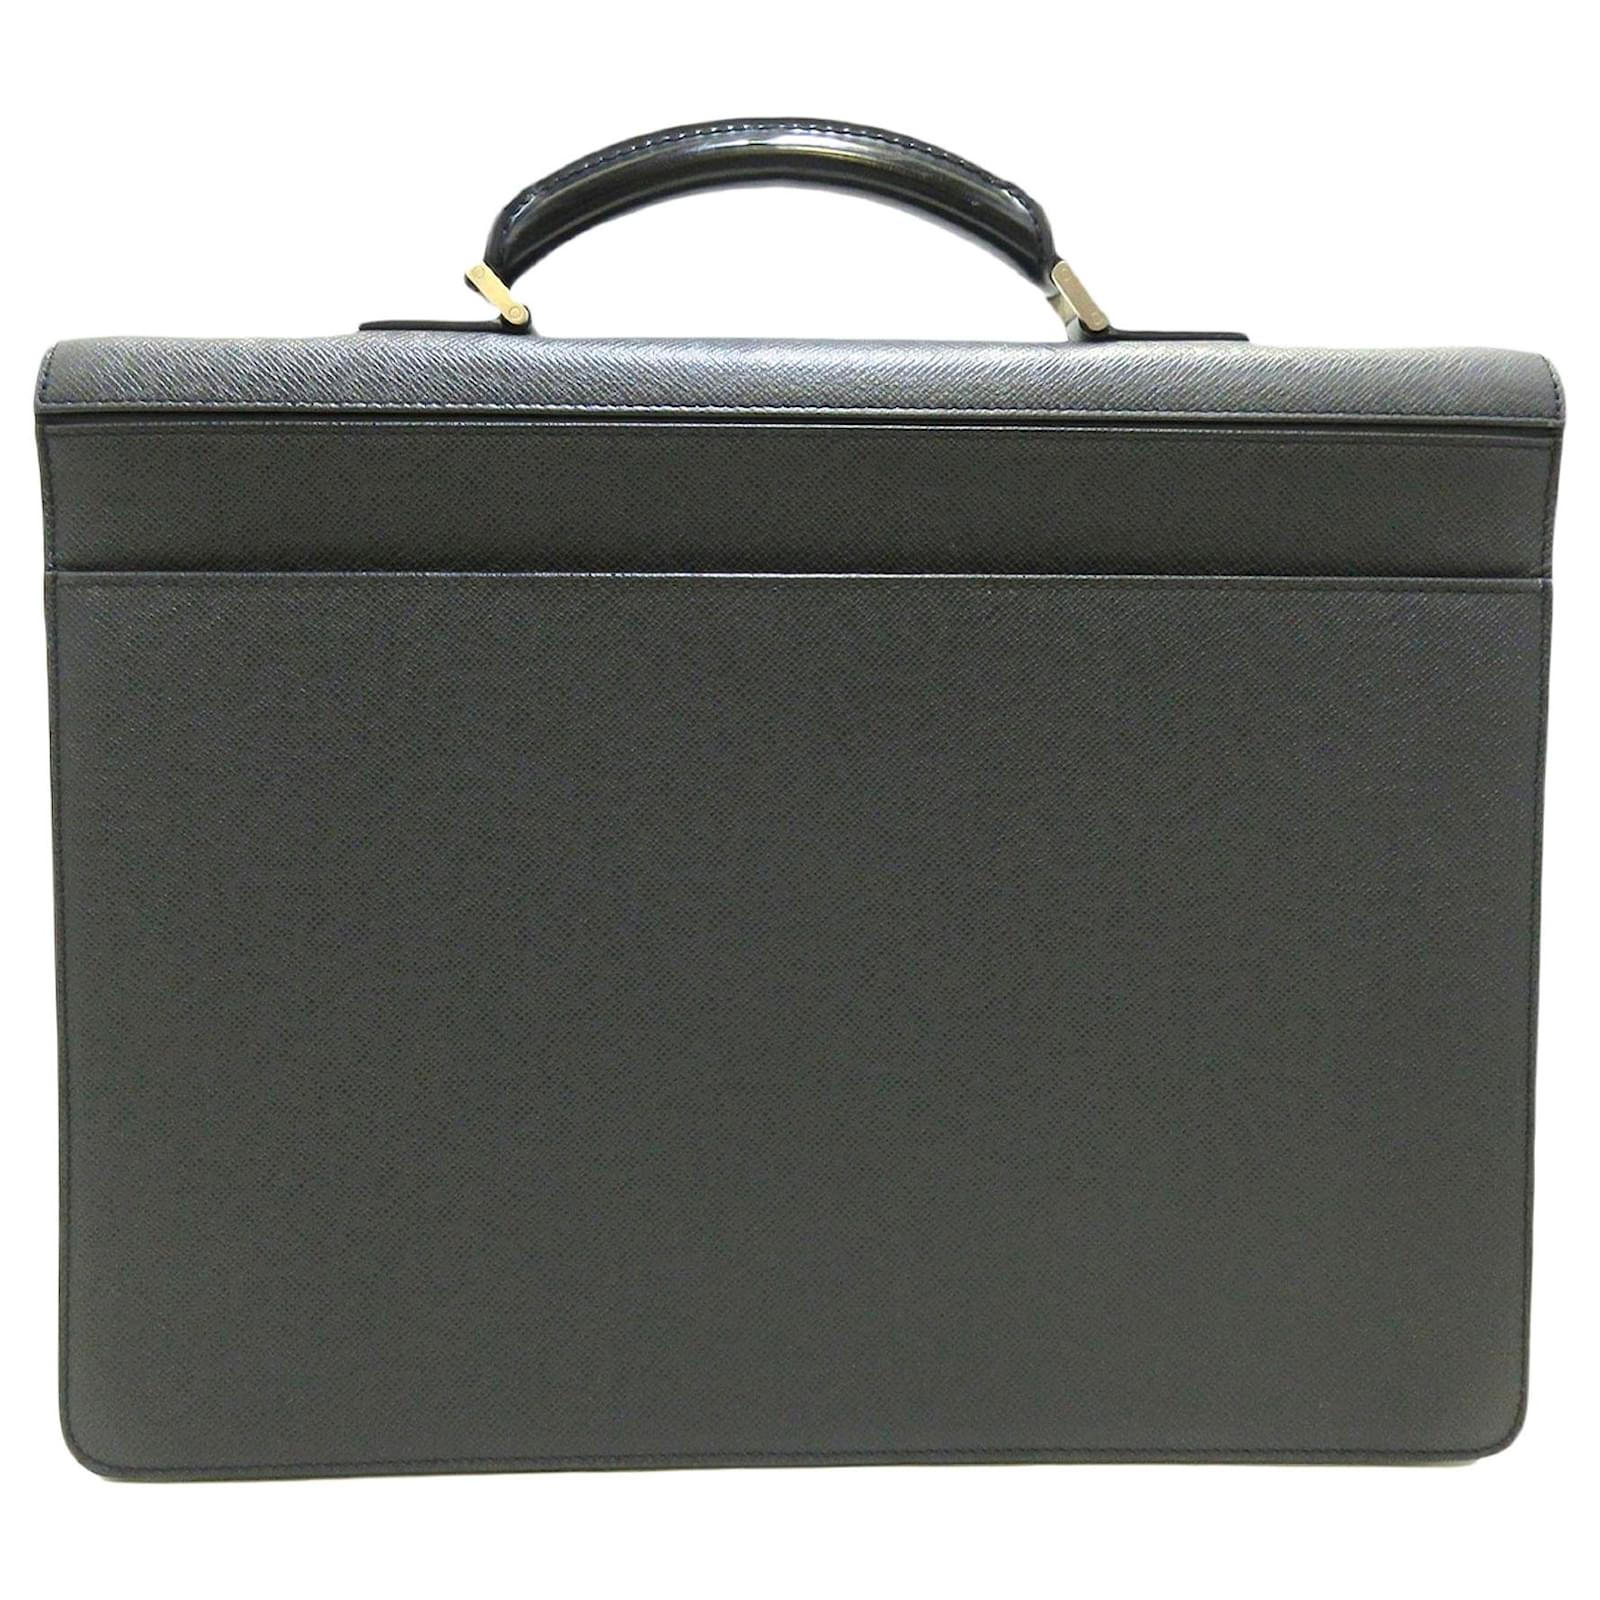 Louis Vuitton Robusto Briefcase in Black Taiga Leather